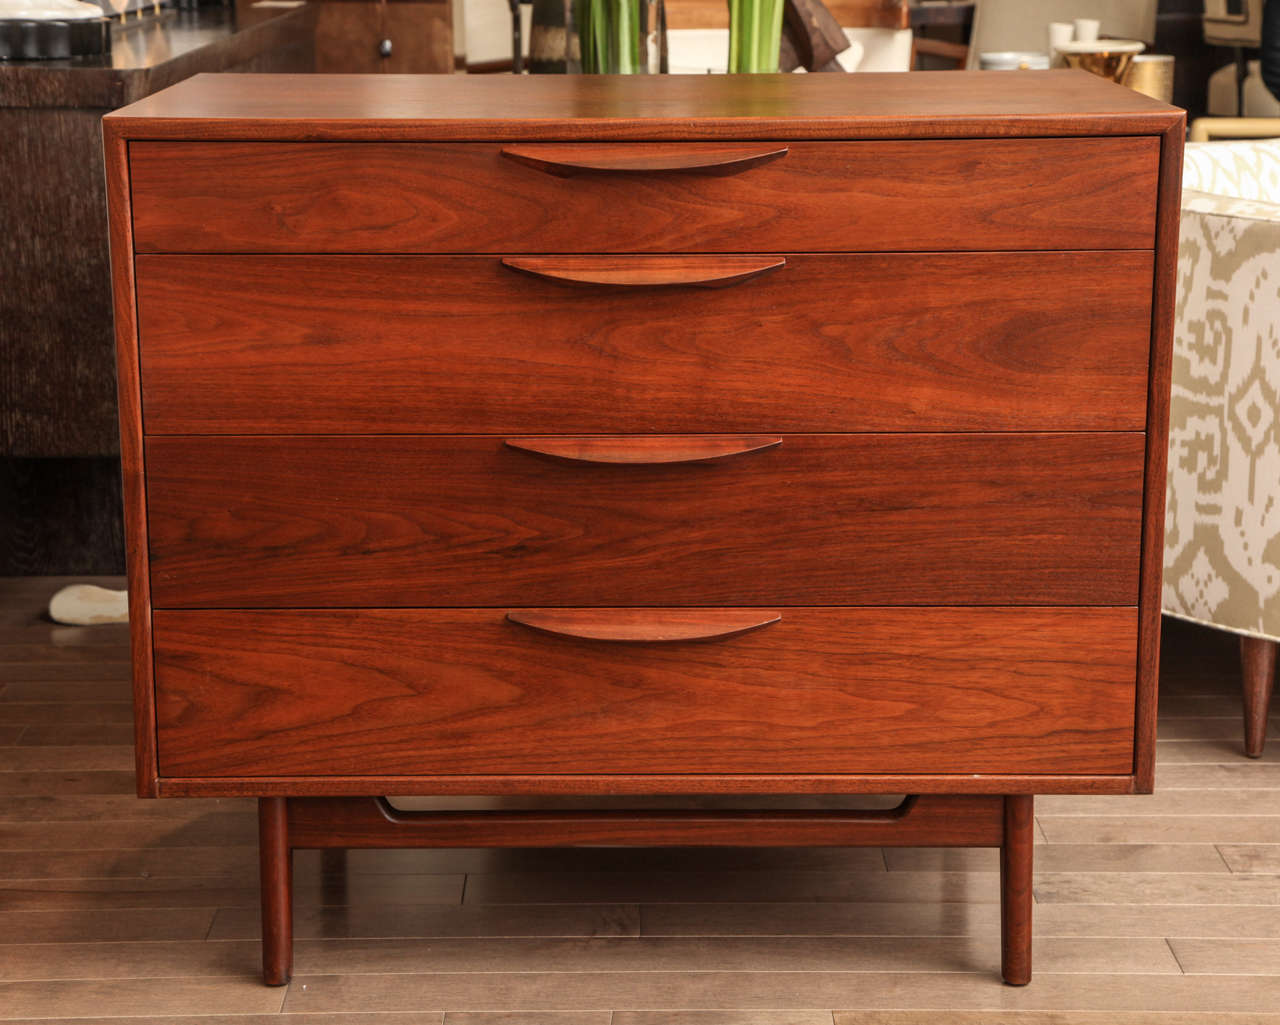 Walnut four-drawer chest with hinged pullout drawer by Jens Risom, circa 1950.